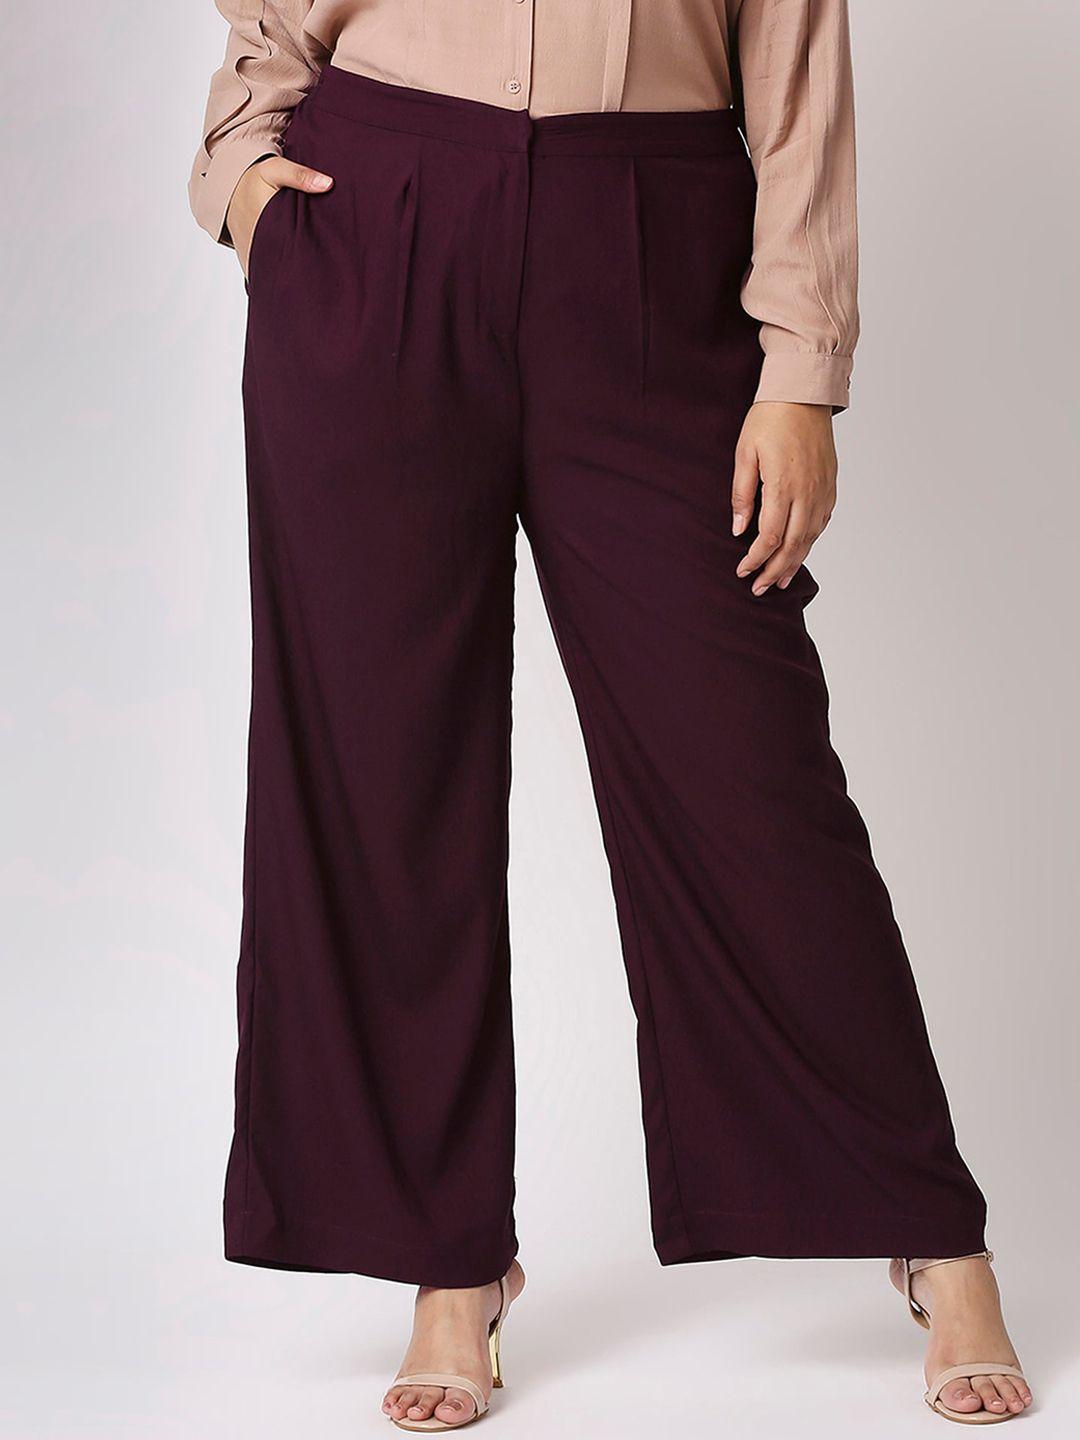 20dresses women maroon high-rise pleated plus size trousers